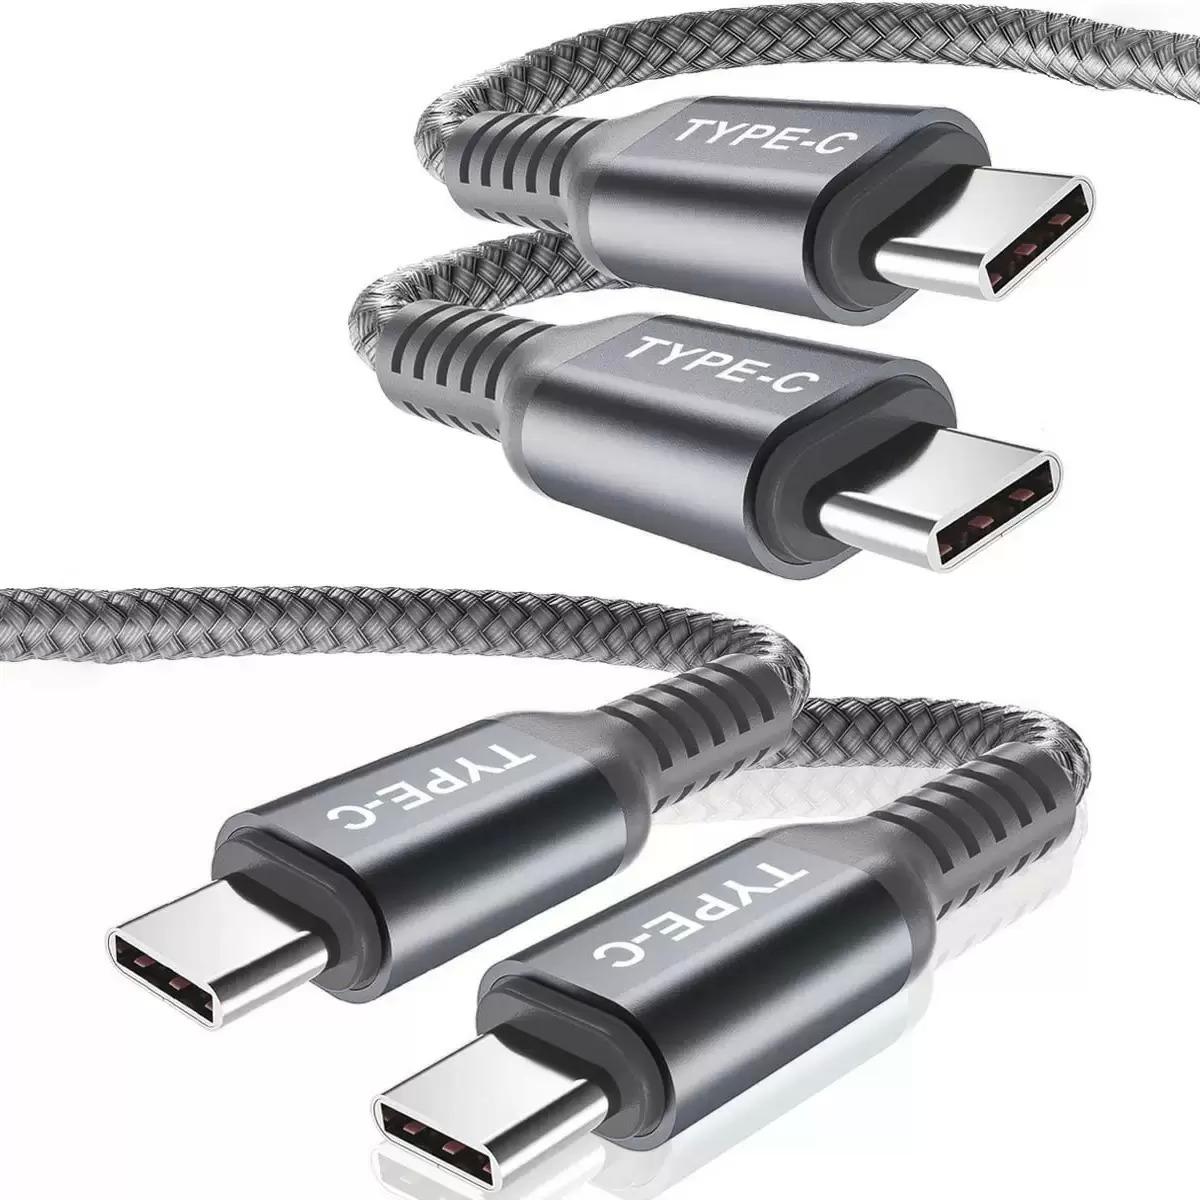 Basesailor 100W 10ft USB-C to Type-C Cable 2 Pack for $7.79